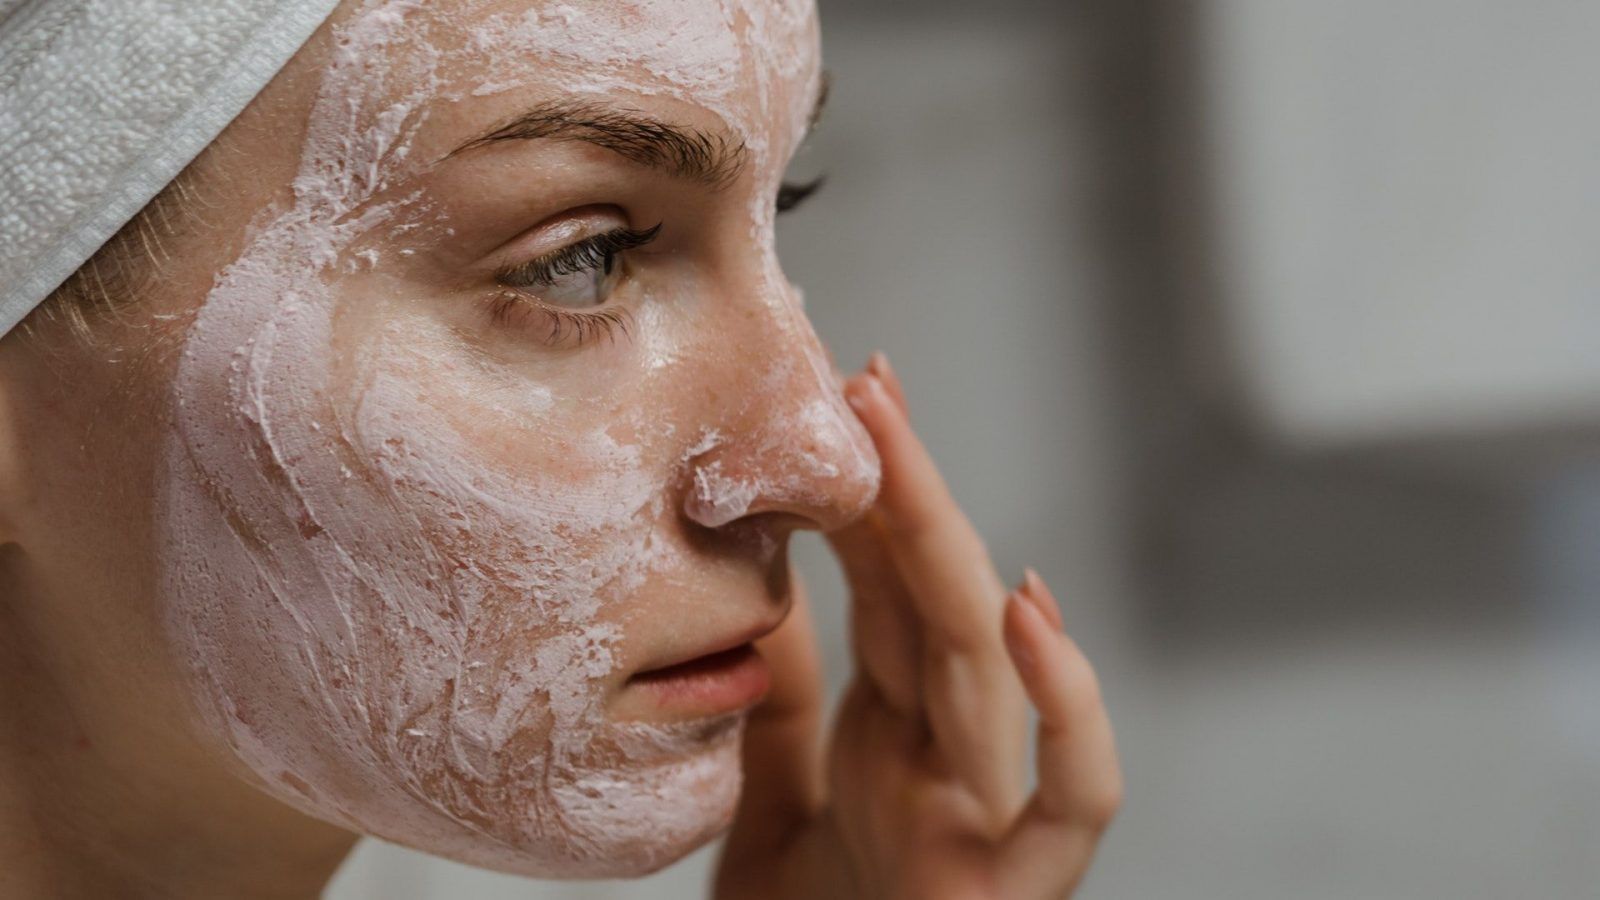 6 best face scrubs for dry skin to achieve a renewed glow